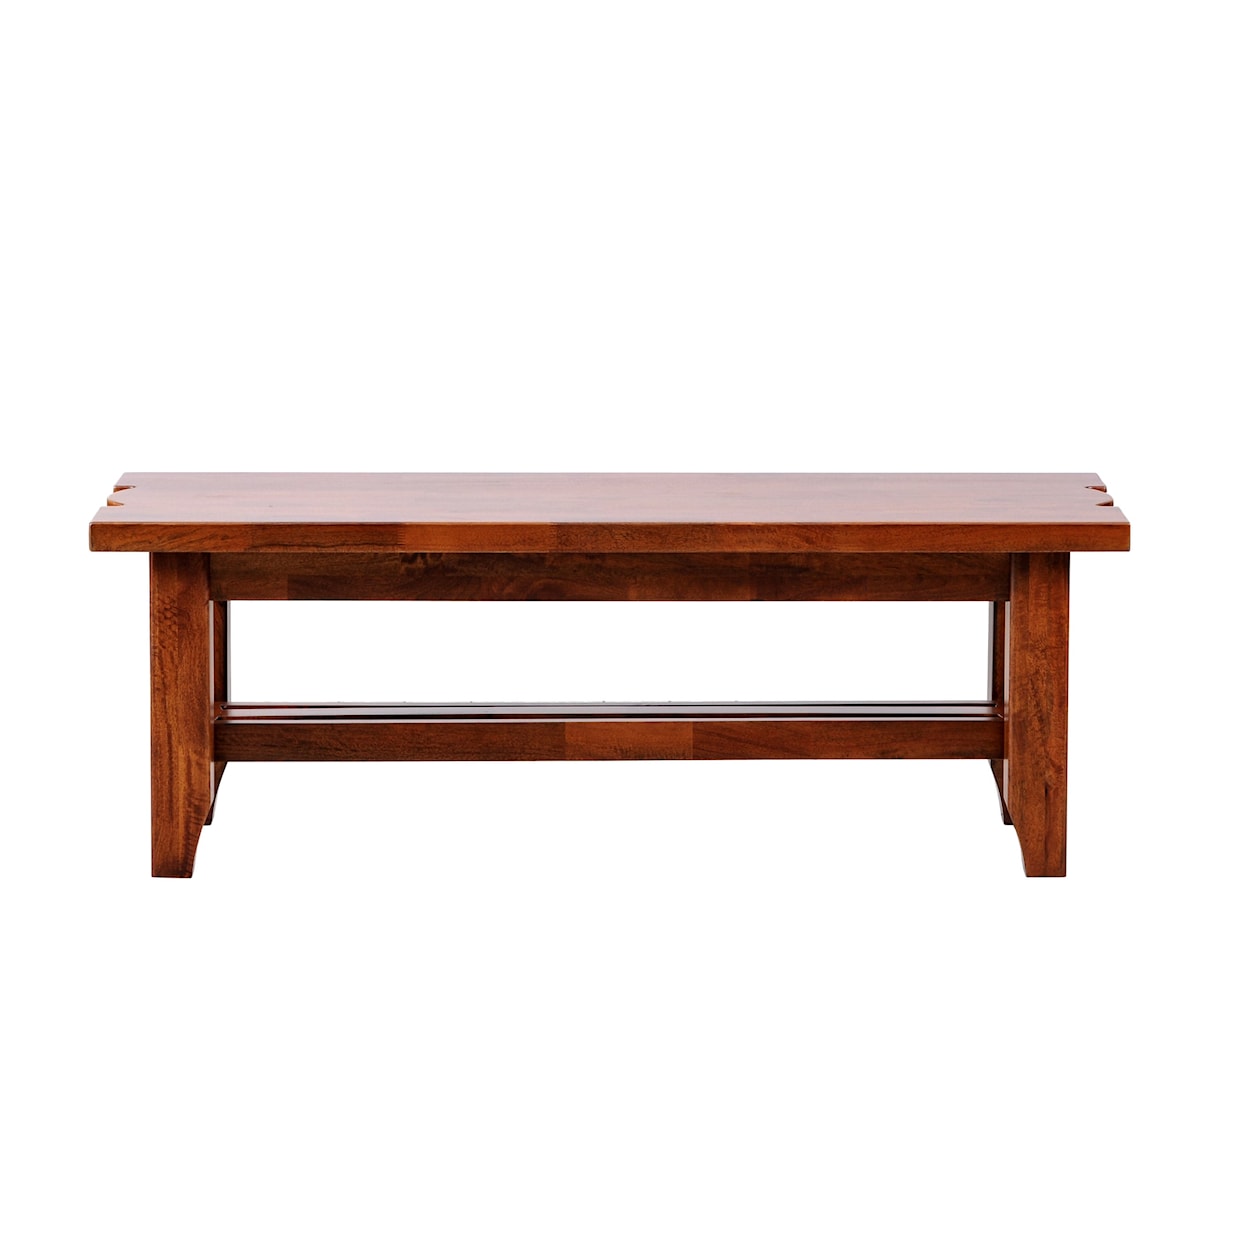 Virginia Furniture Market Solid Wood Whittier Dining Bench